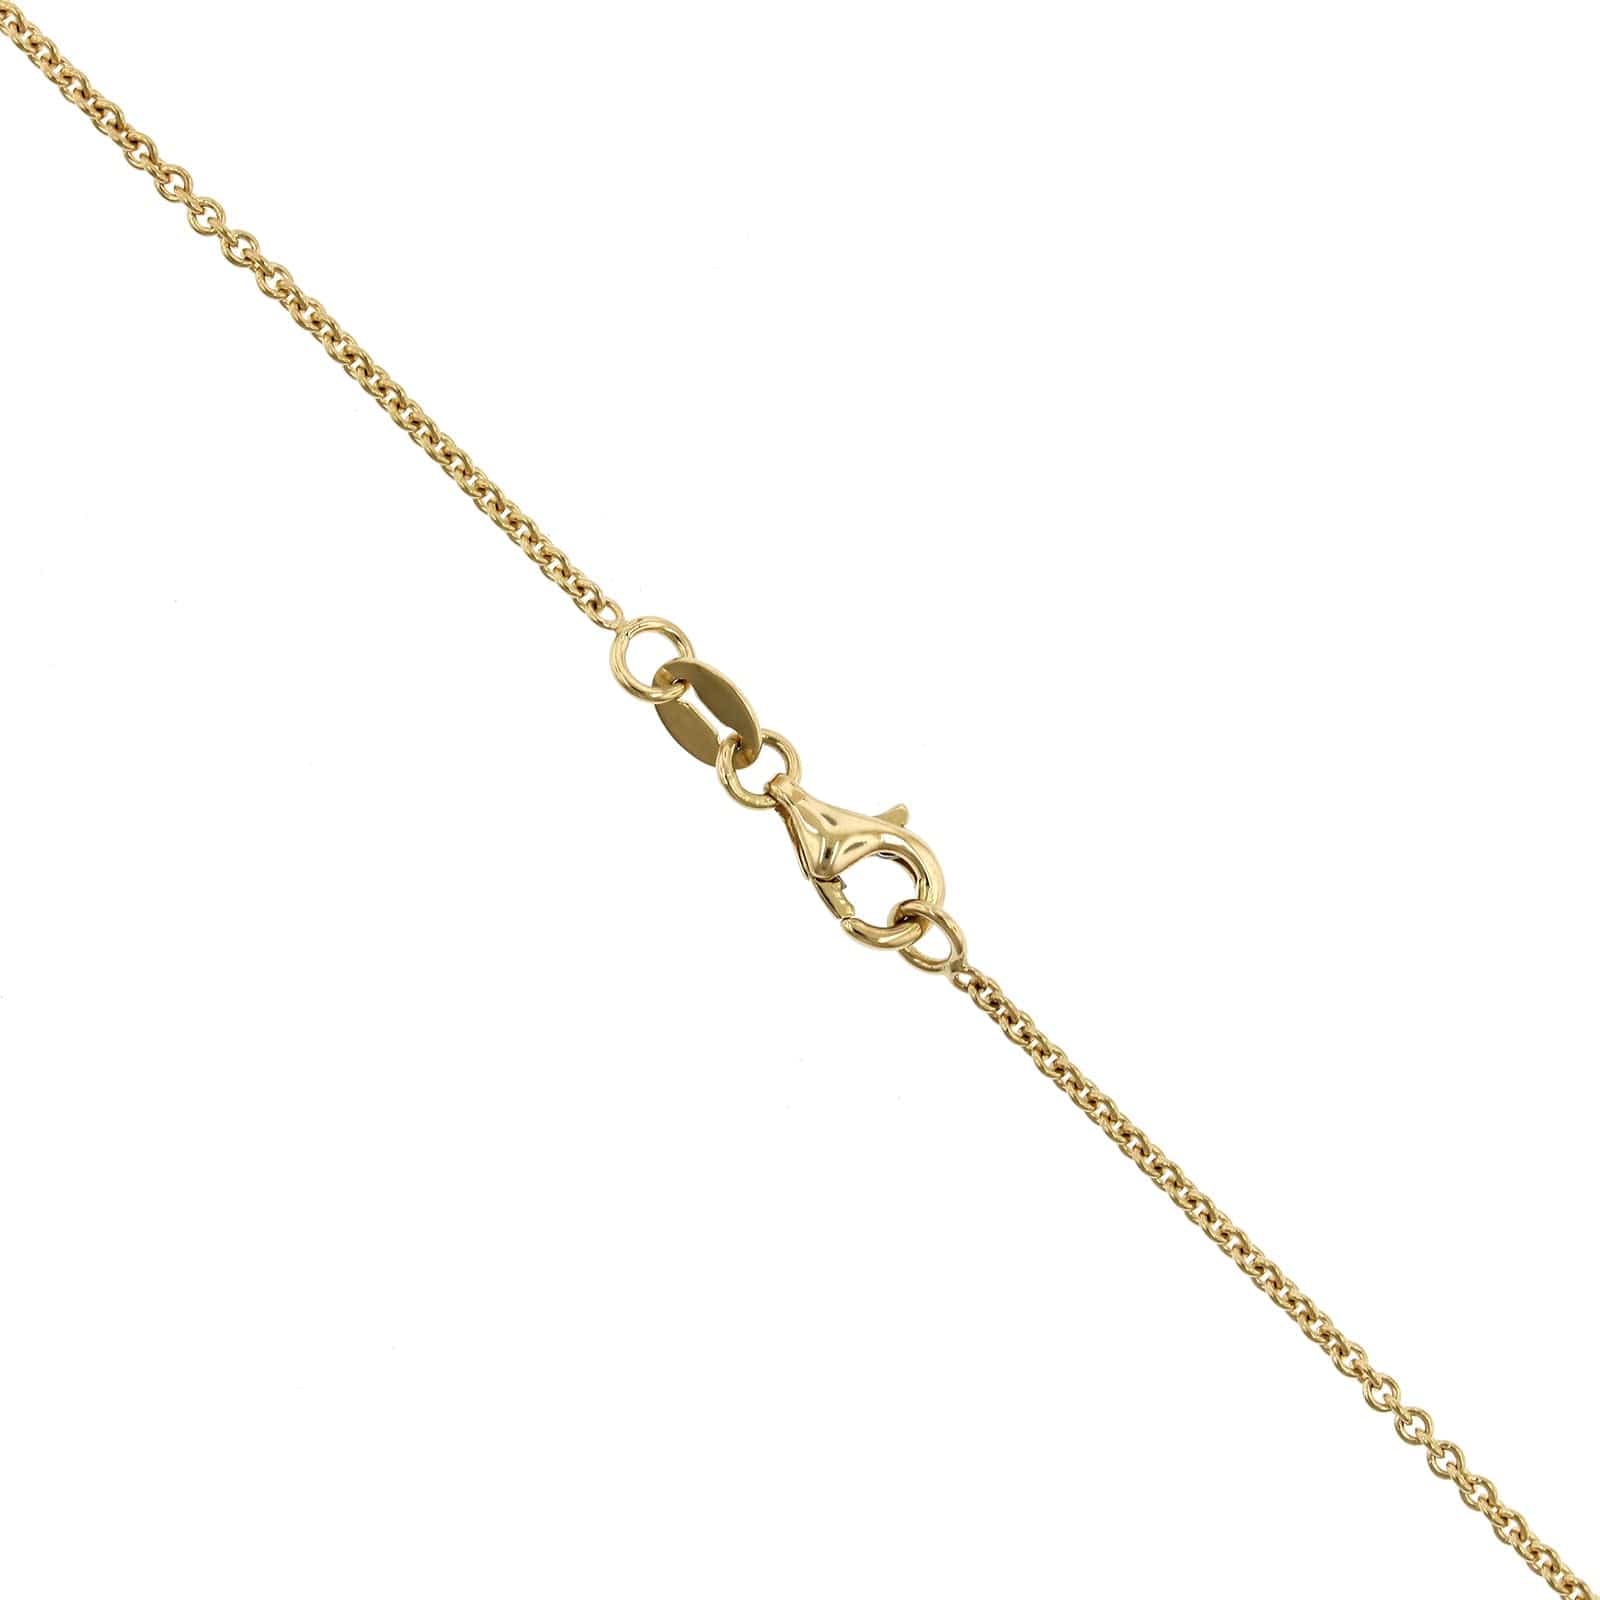 18K Yellow Gold Four Point Flower Diamond Necklace, 18k yellow gold, Long's Jewelers